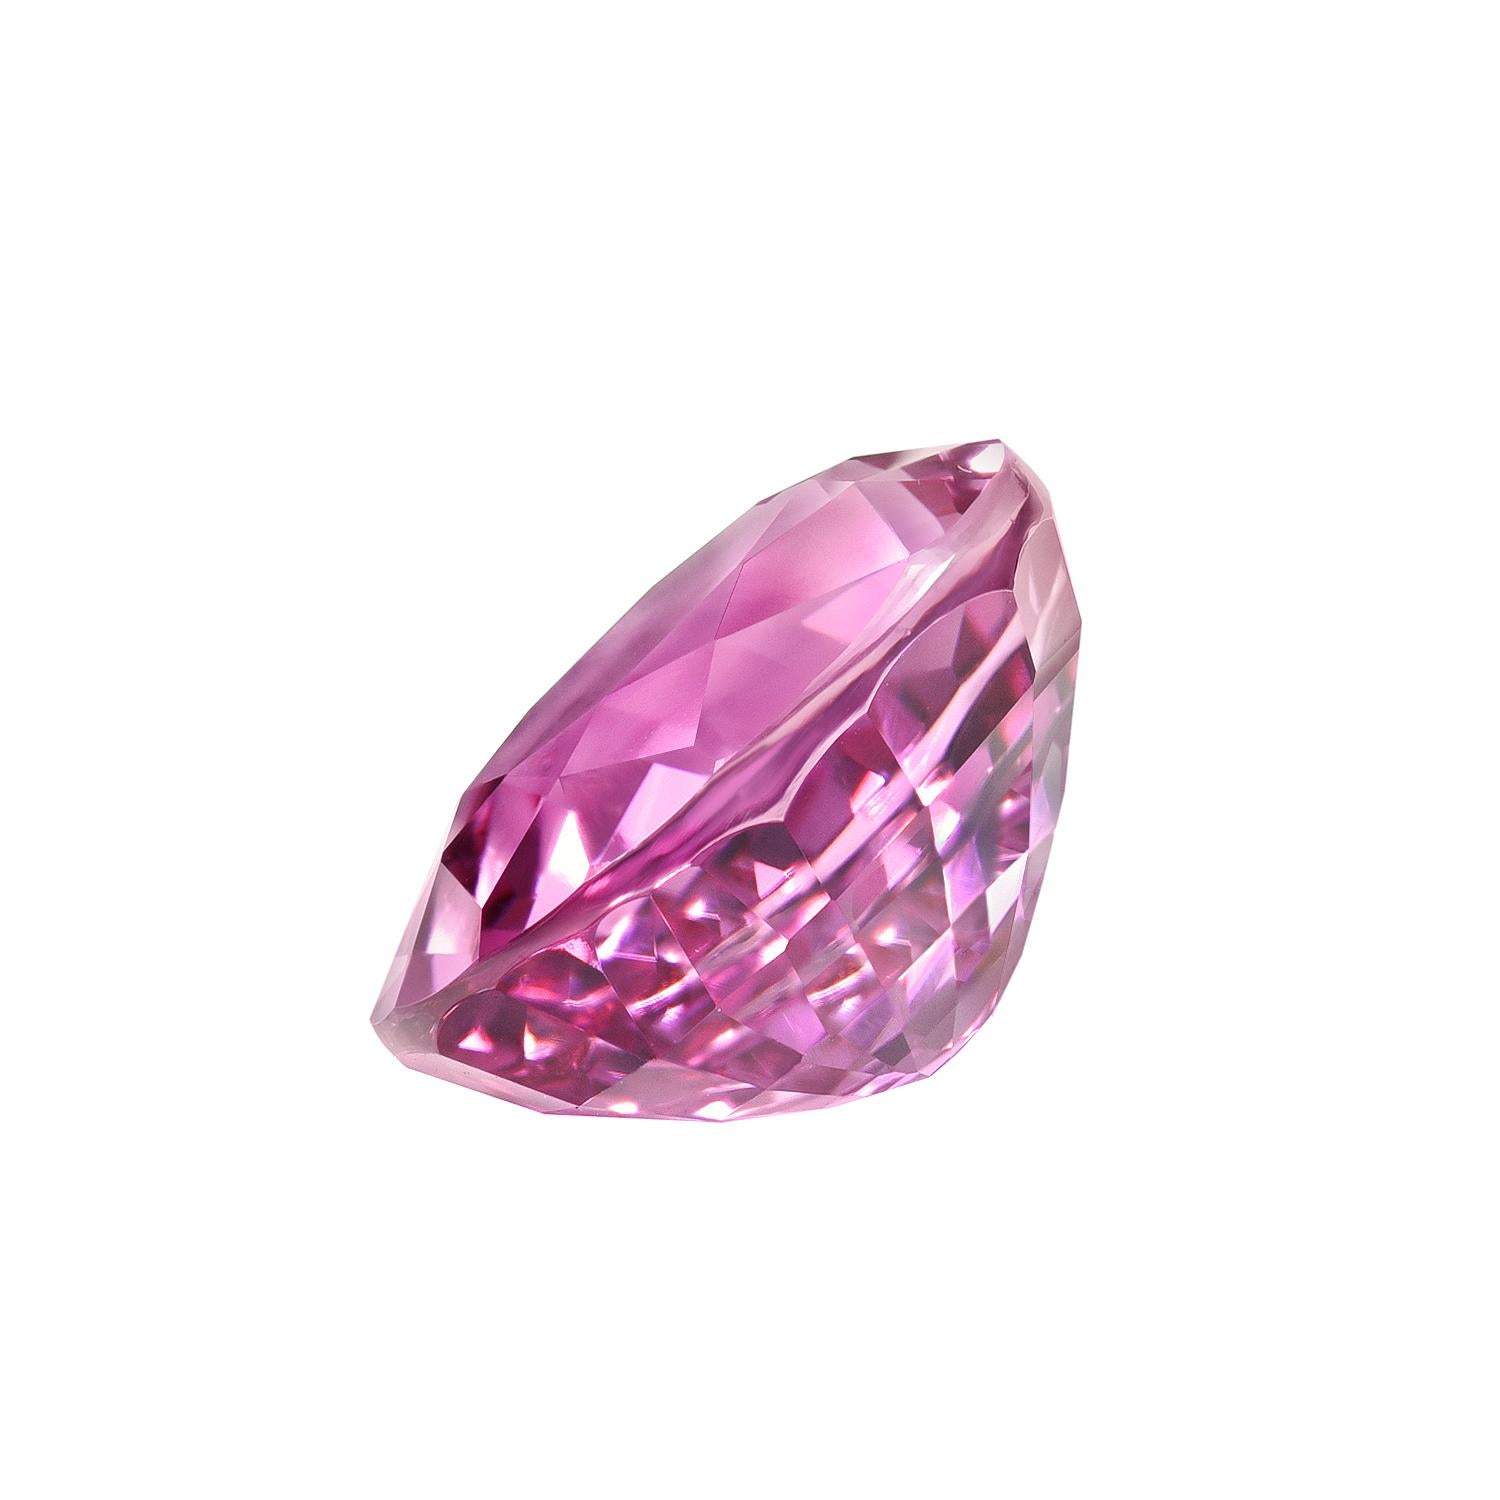 Impressive 4.03 carat Pink Sapphire oval gem, offered loose to someone special.
Gem measurements: 10.24mm x 7.82mm x 5.71mm
The GIA certificate is attached to the image selection for your reference.
Returns are accepted and paid by us within 7 days